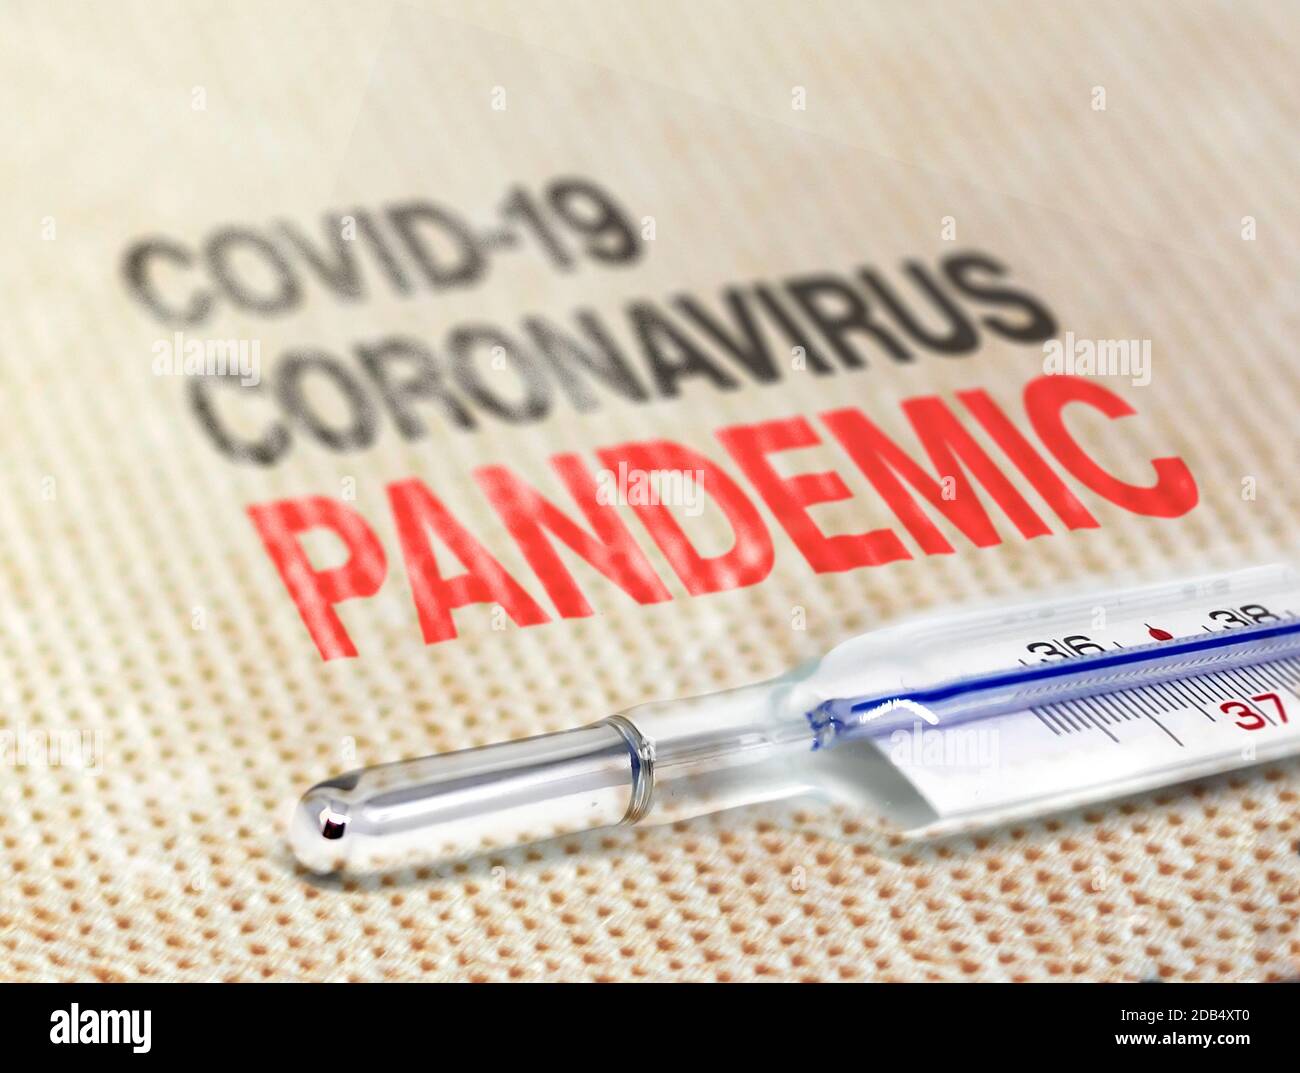 a thermometer resting on a soft surface indicating the Covid-19 Coronavirus pandemic. Worldwide Virus pandemic Stock Photo